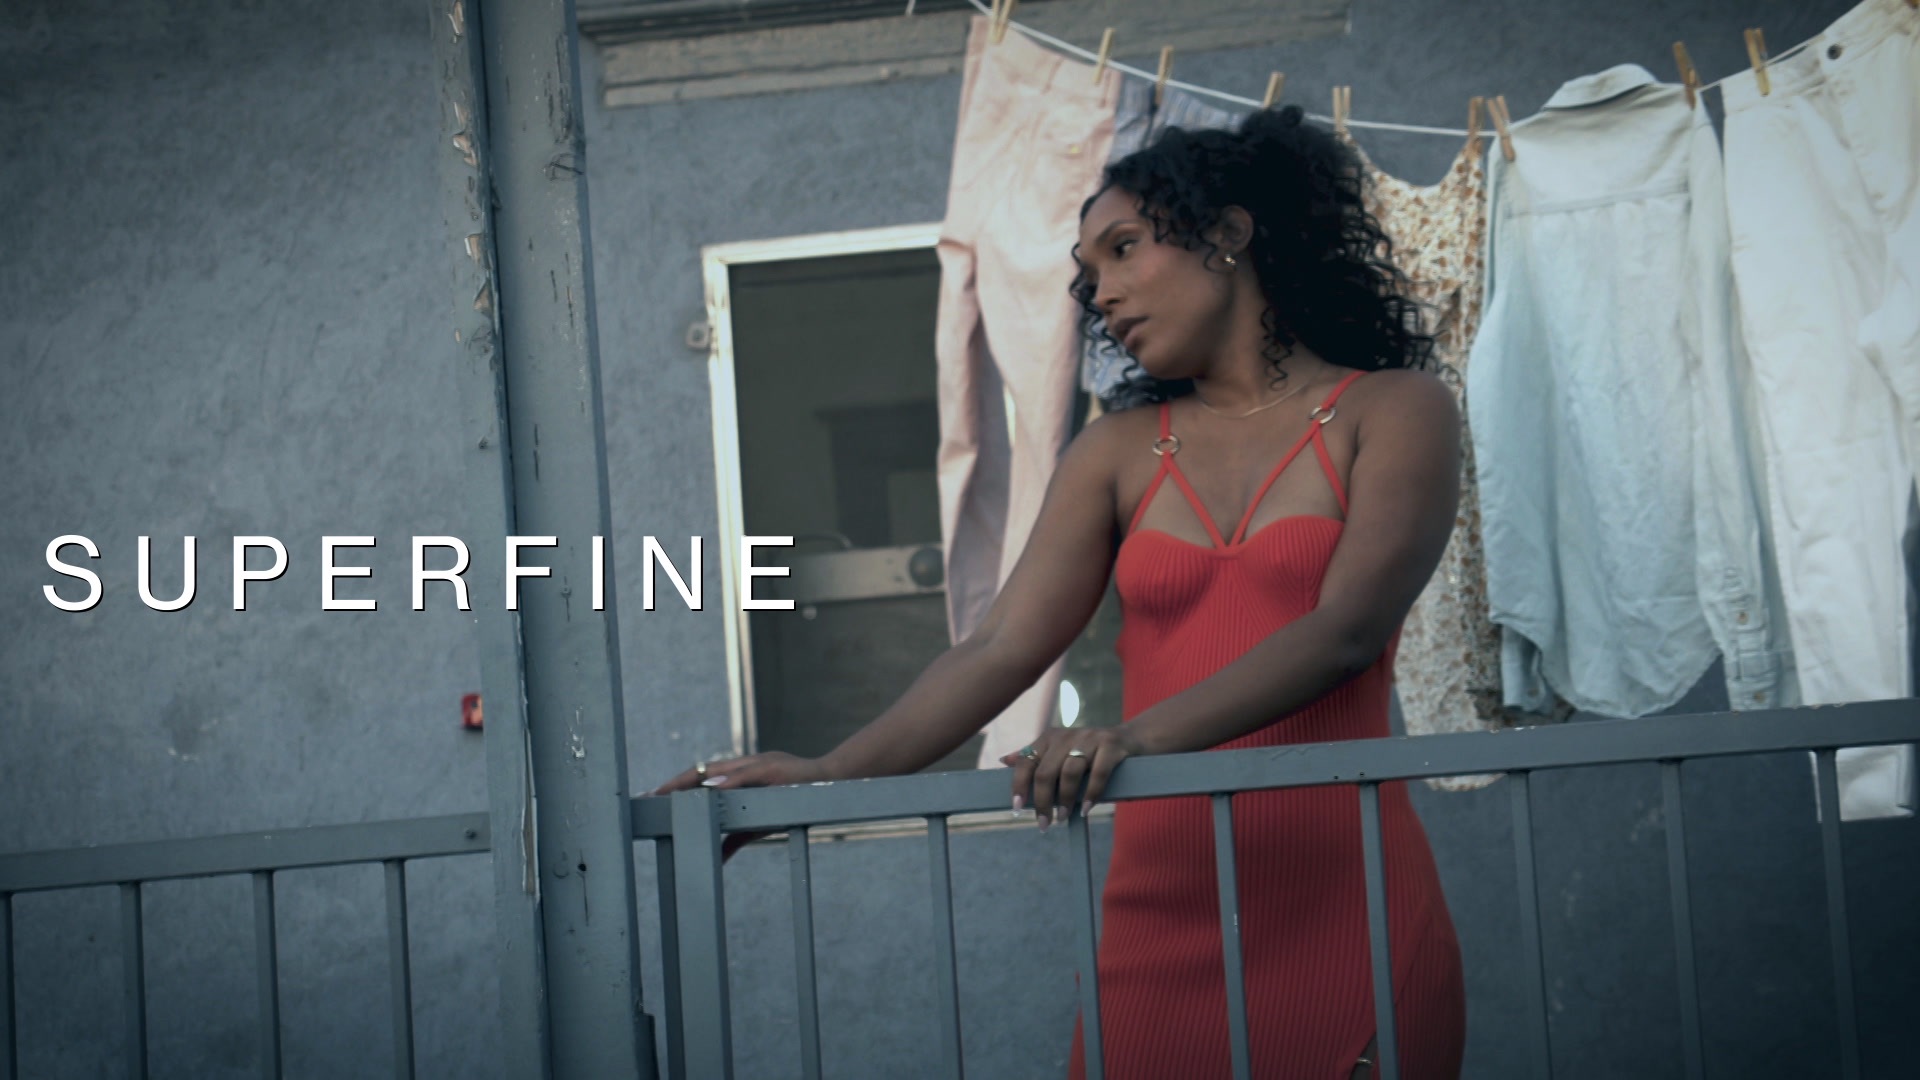 SUPERFINE (Official Lyric Video) - Music Video by India Shawn - Apple Music